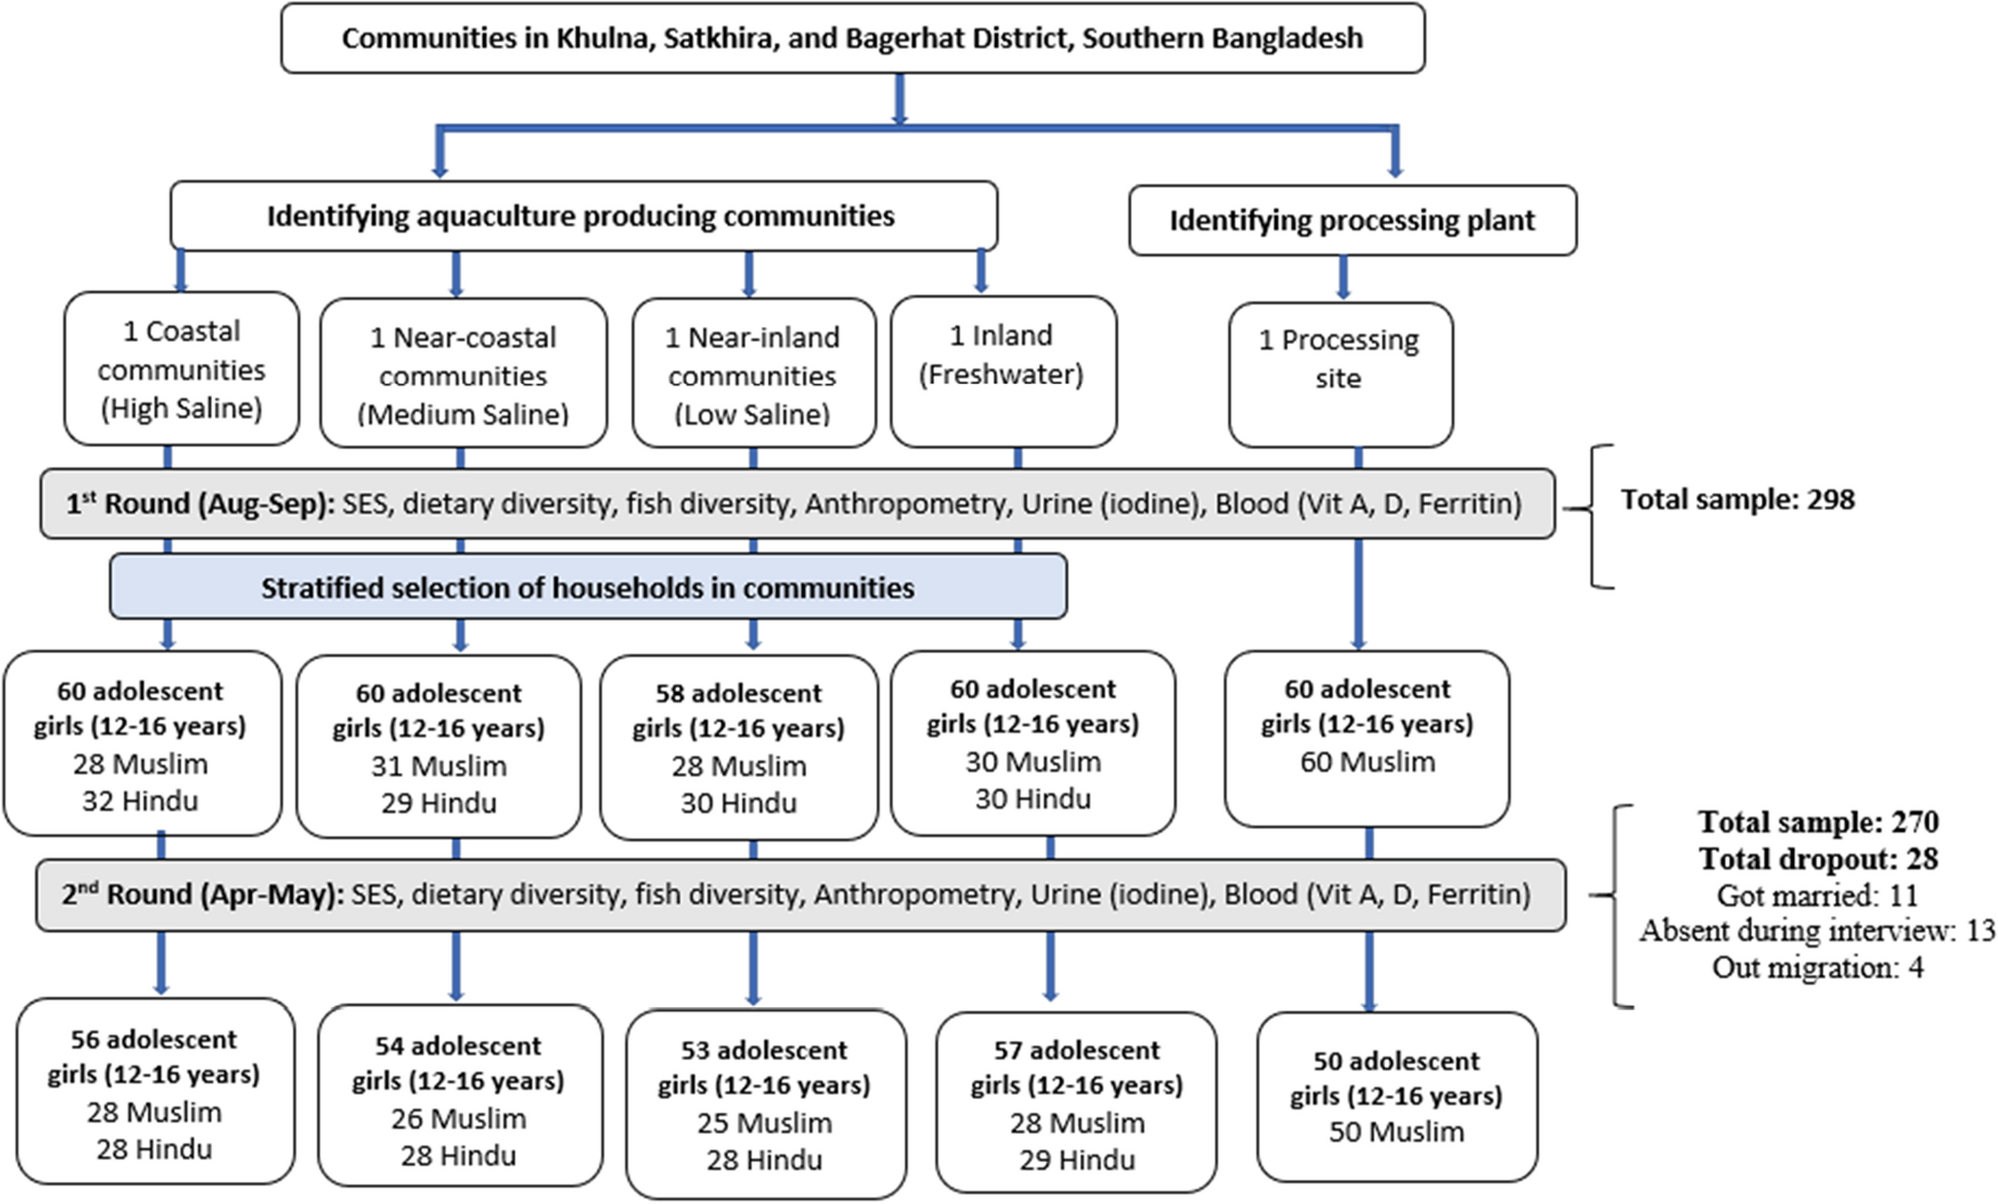 Factors affecting the micronutrient status of adolescent girls living in complex agro-aquatic ecological zones of Bangladesh Scientific Reports